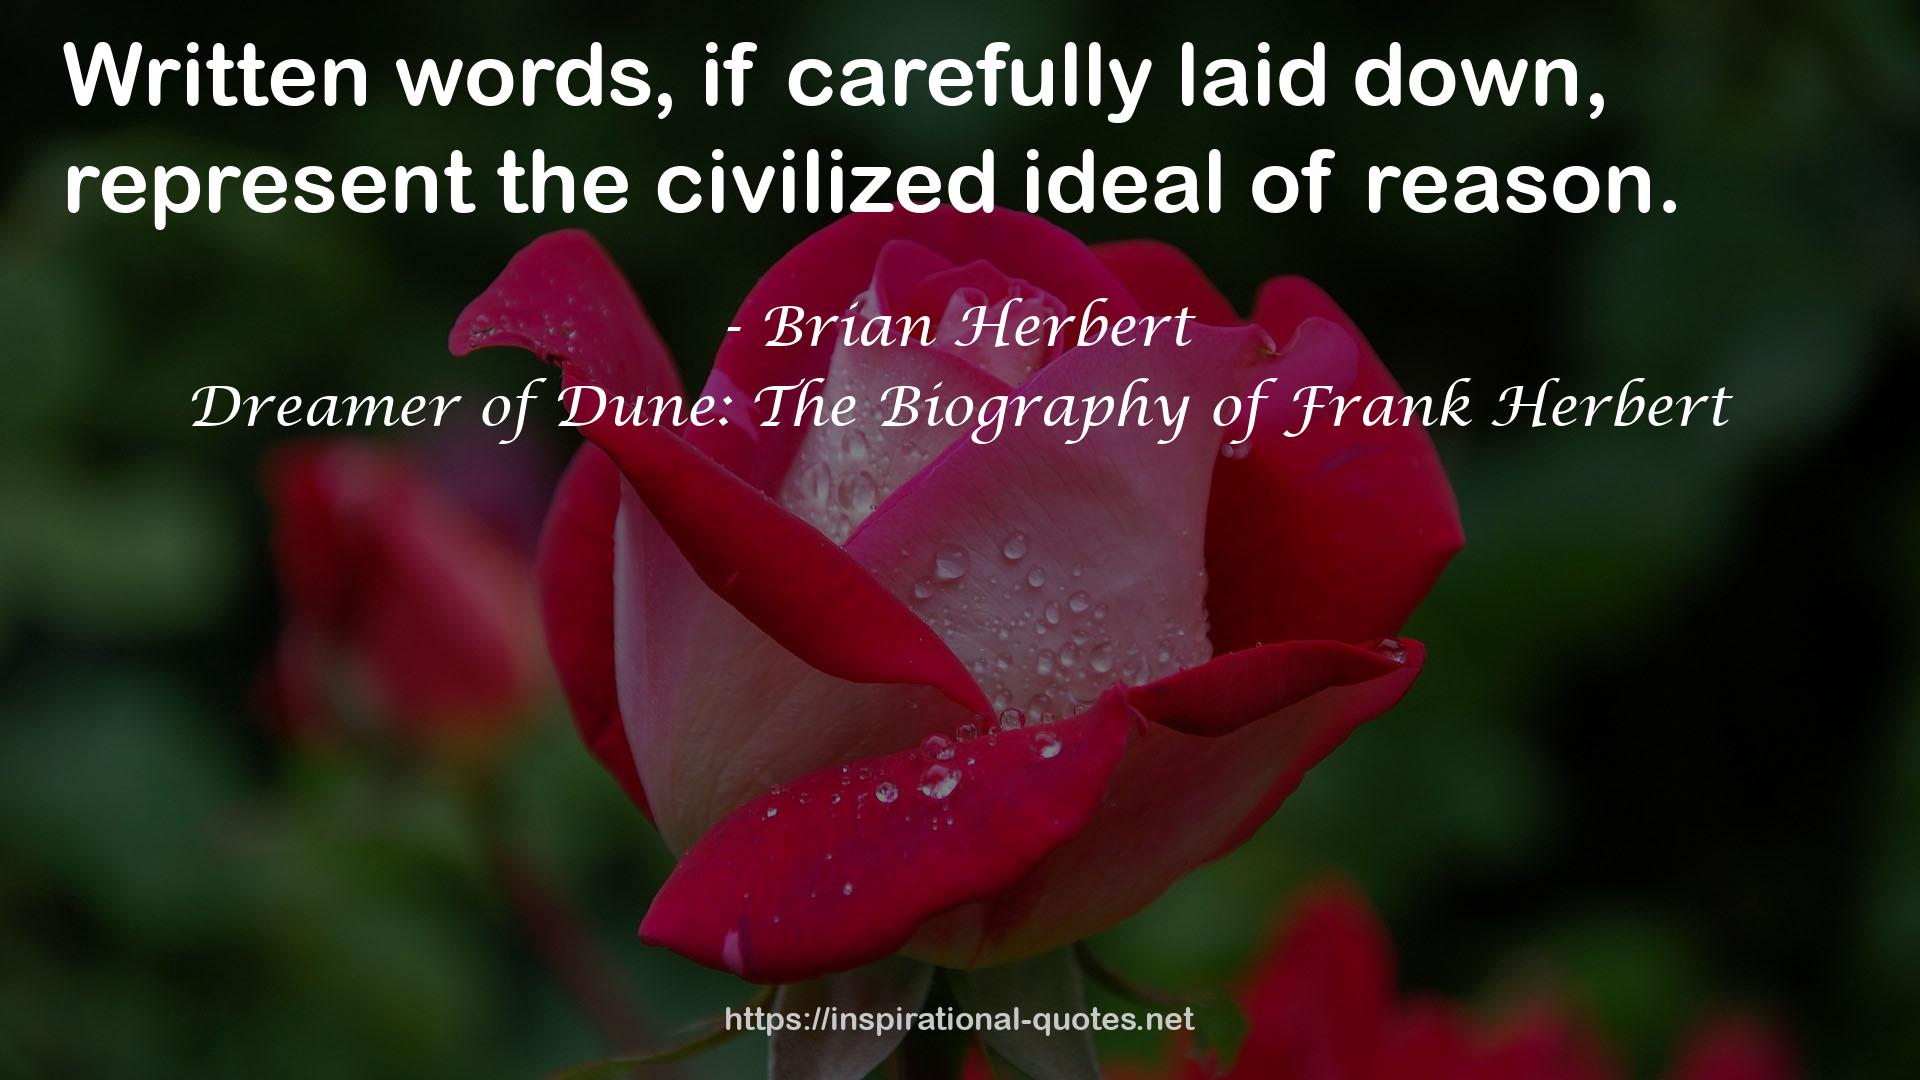 Dreamer of Dune: The Biography of Frank Herbert QUOTES